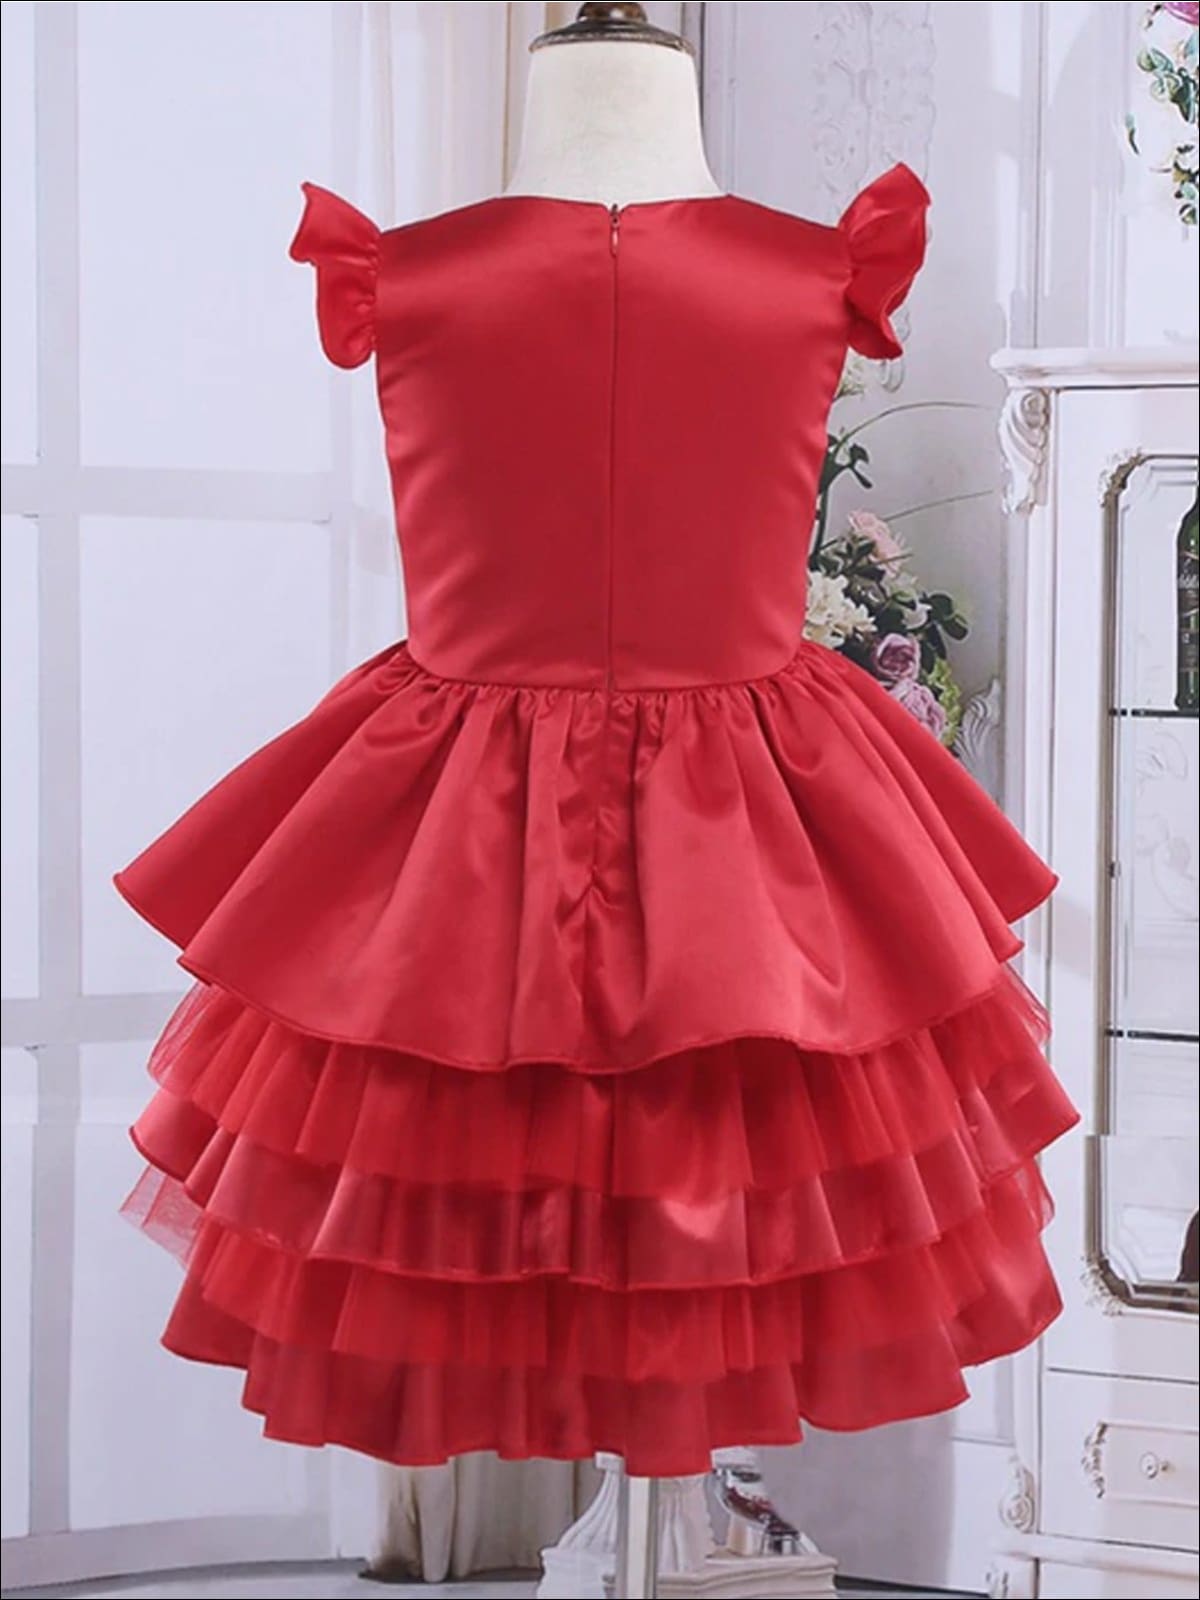 Girls Red Flutter Sleeve Satin Tiered Ruffle Special Occasion Party Dress - Girls Fall Dressy Dress